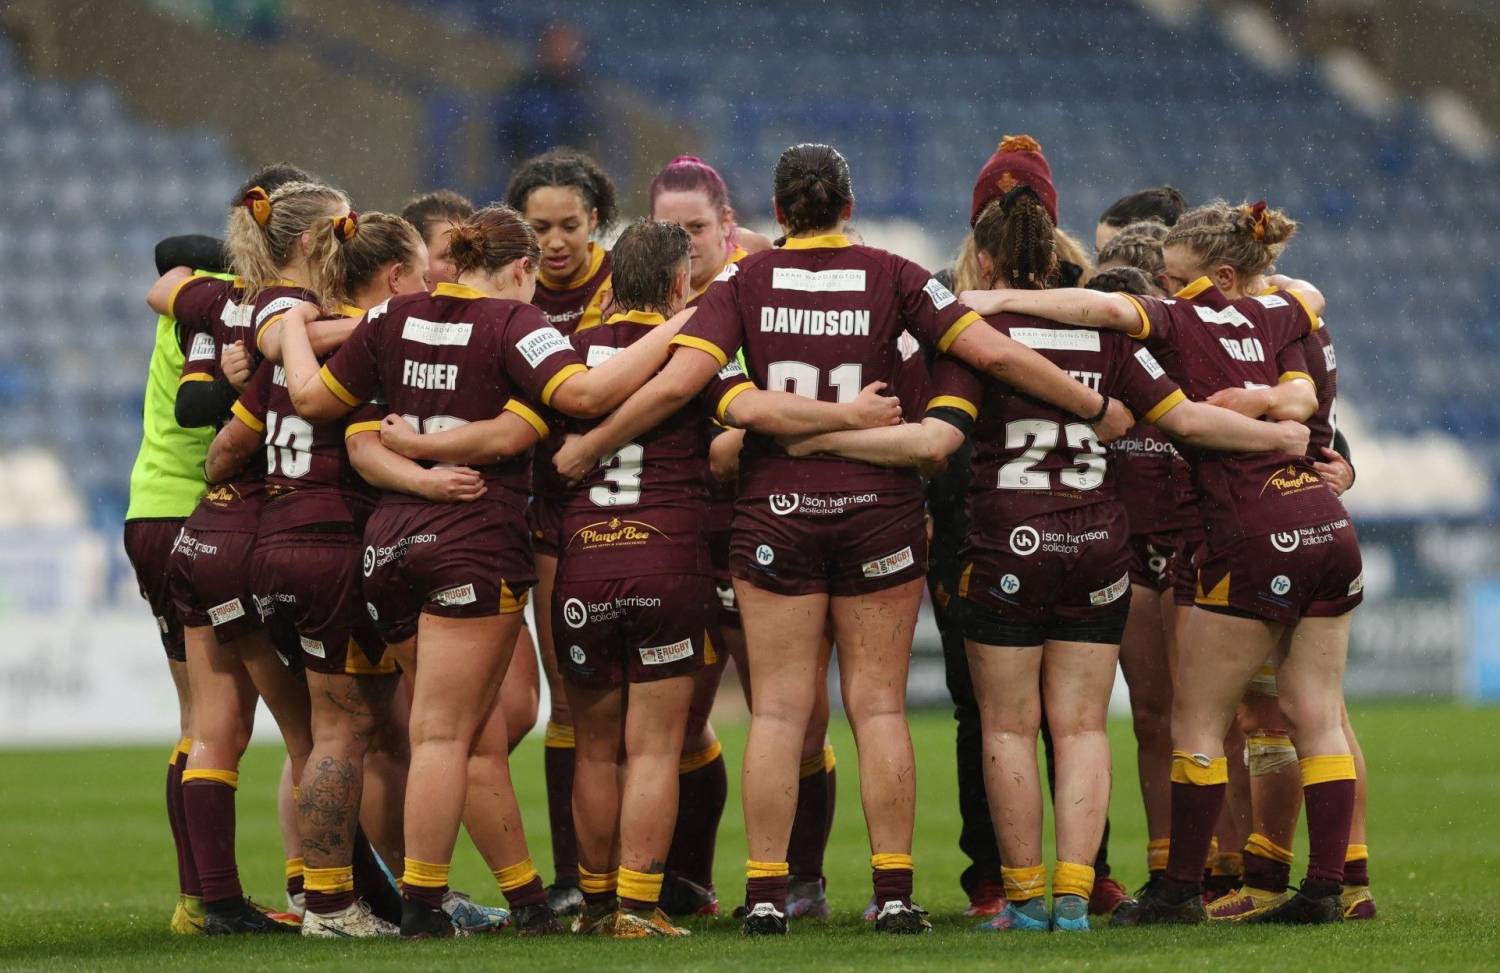 GIANTS WOMEN CHALLENGE CUP CLASH TO BE LIVE STREAMED